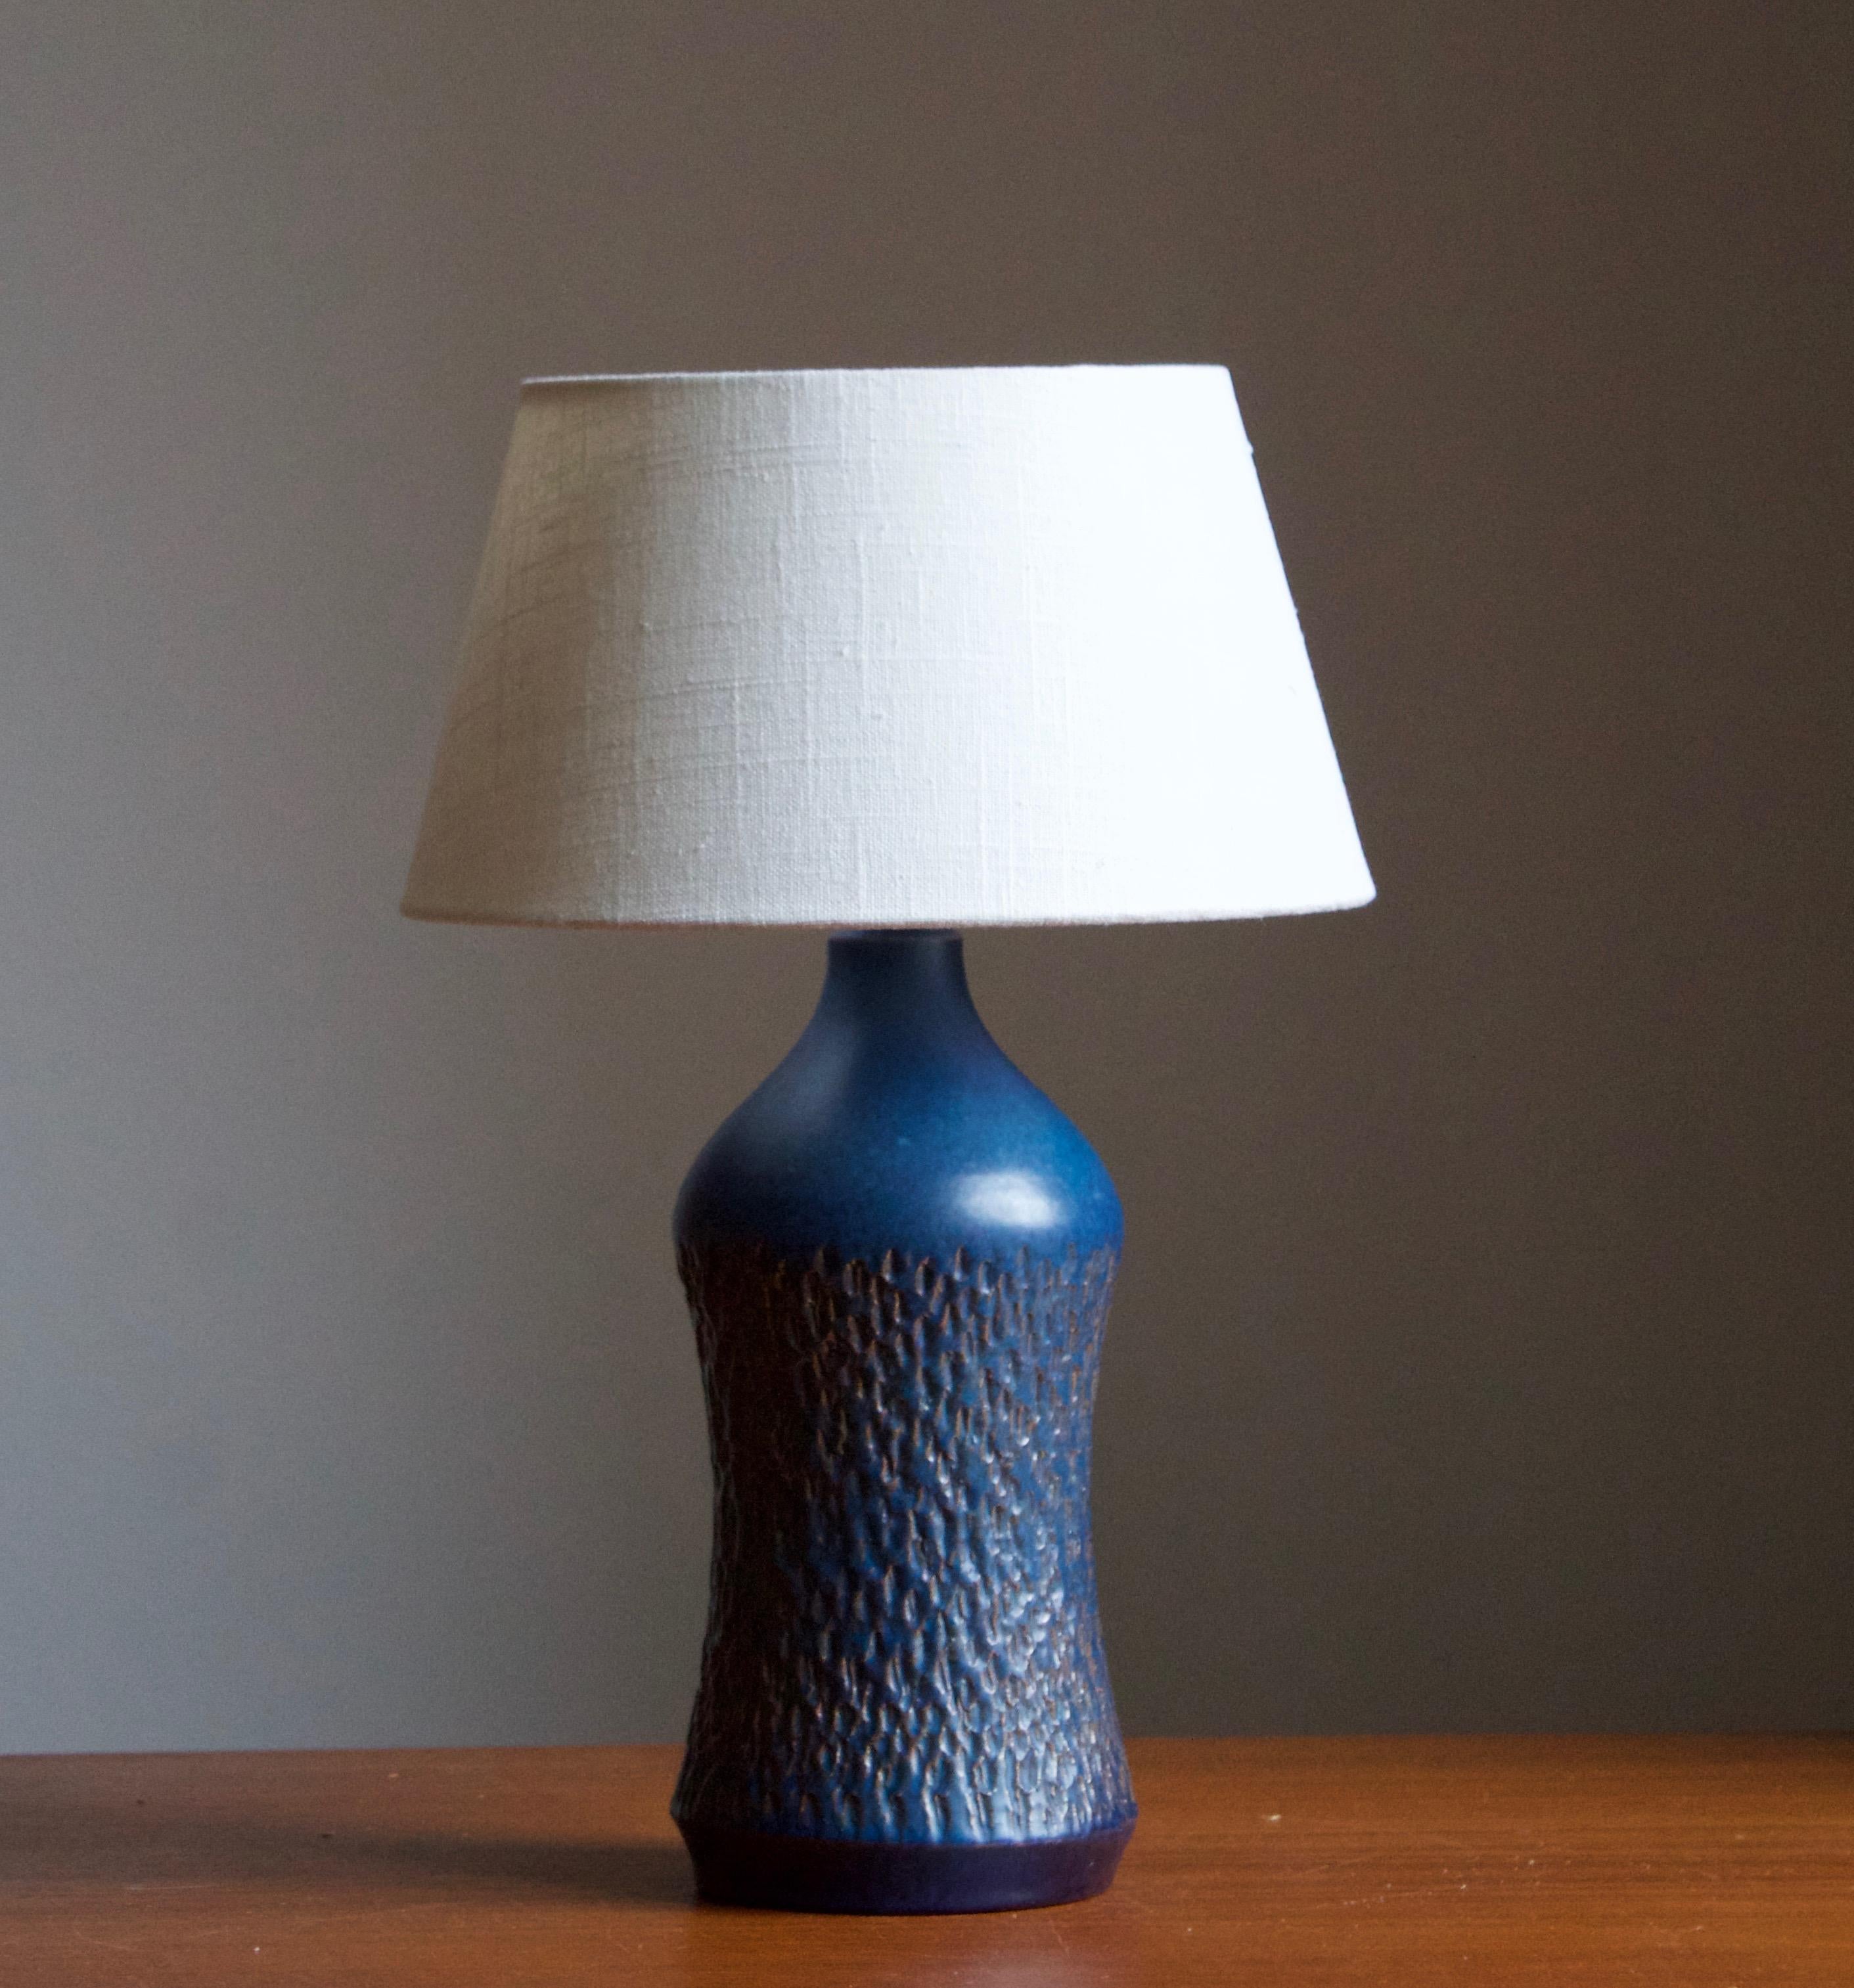 A stoneware table lamp designed by Henry Brandi, and produced by his own firm, Brandi Vejbystrand, Sweden, 1960s. Marked and labeled. 

Stated dimensions exclude lamsphade. Height includes socket. The lampshade is not included in the